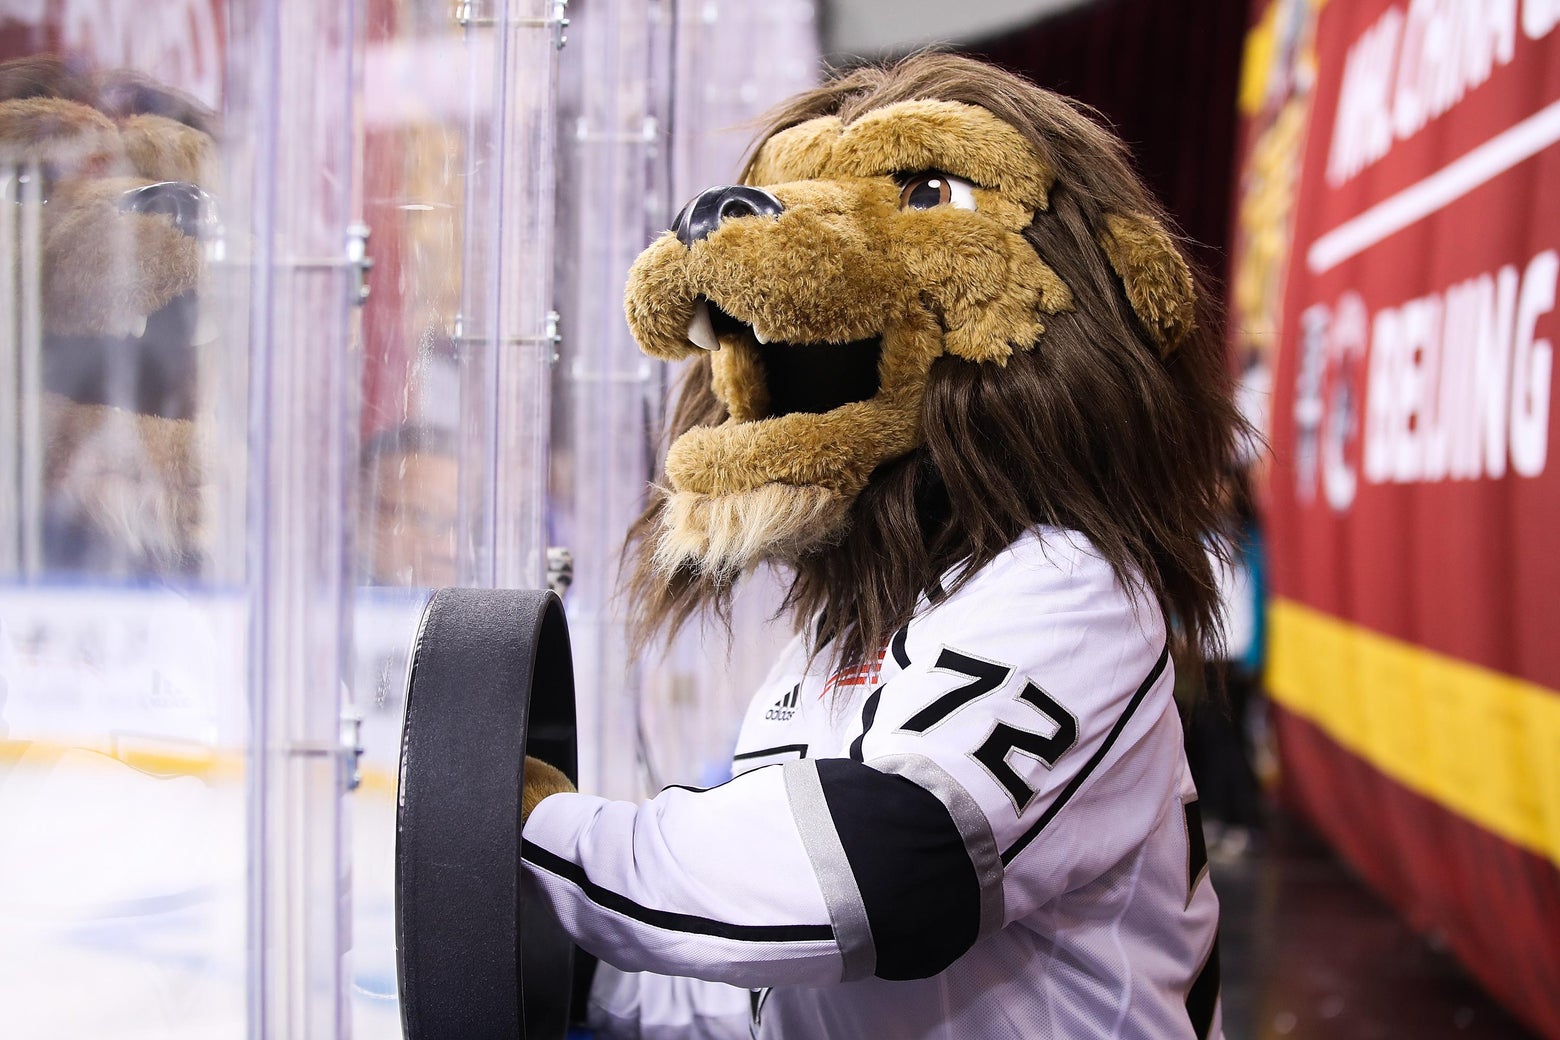 L.A. Kings mascot sued for allegedly grabbing male coworker's butt